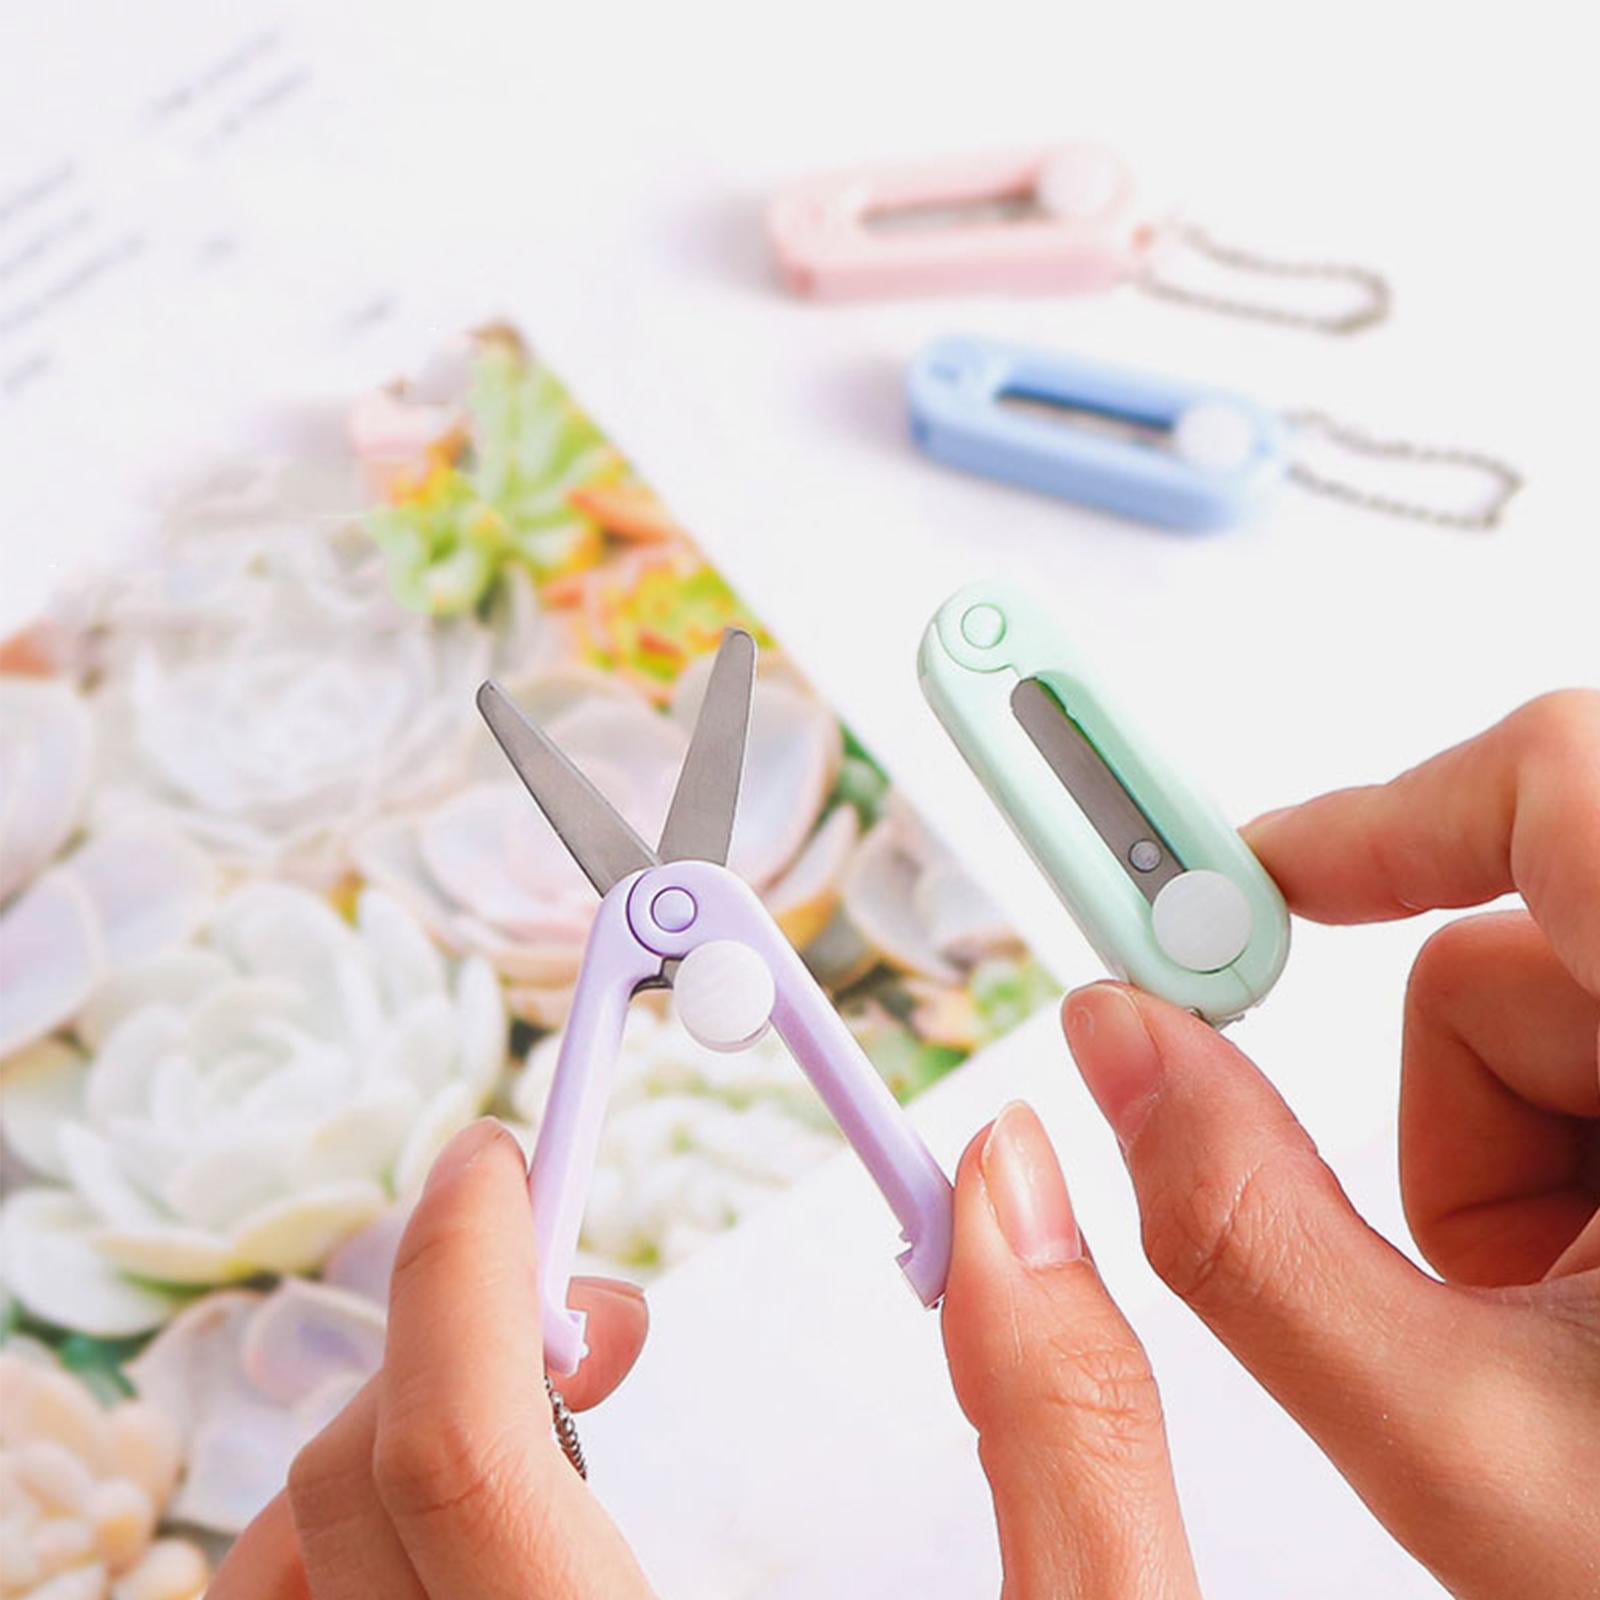 Folding Scissors Safe Portable Travel Scissors Foldable Telescopic Cutter  Pocket Mini Scissor with Keychain for Cutting, Scrapbooking, Crafting,  Sewing G9R7 